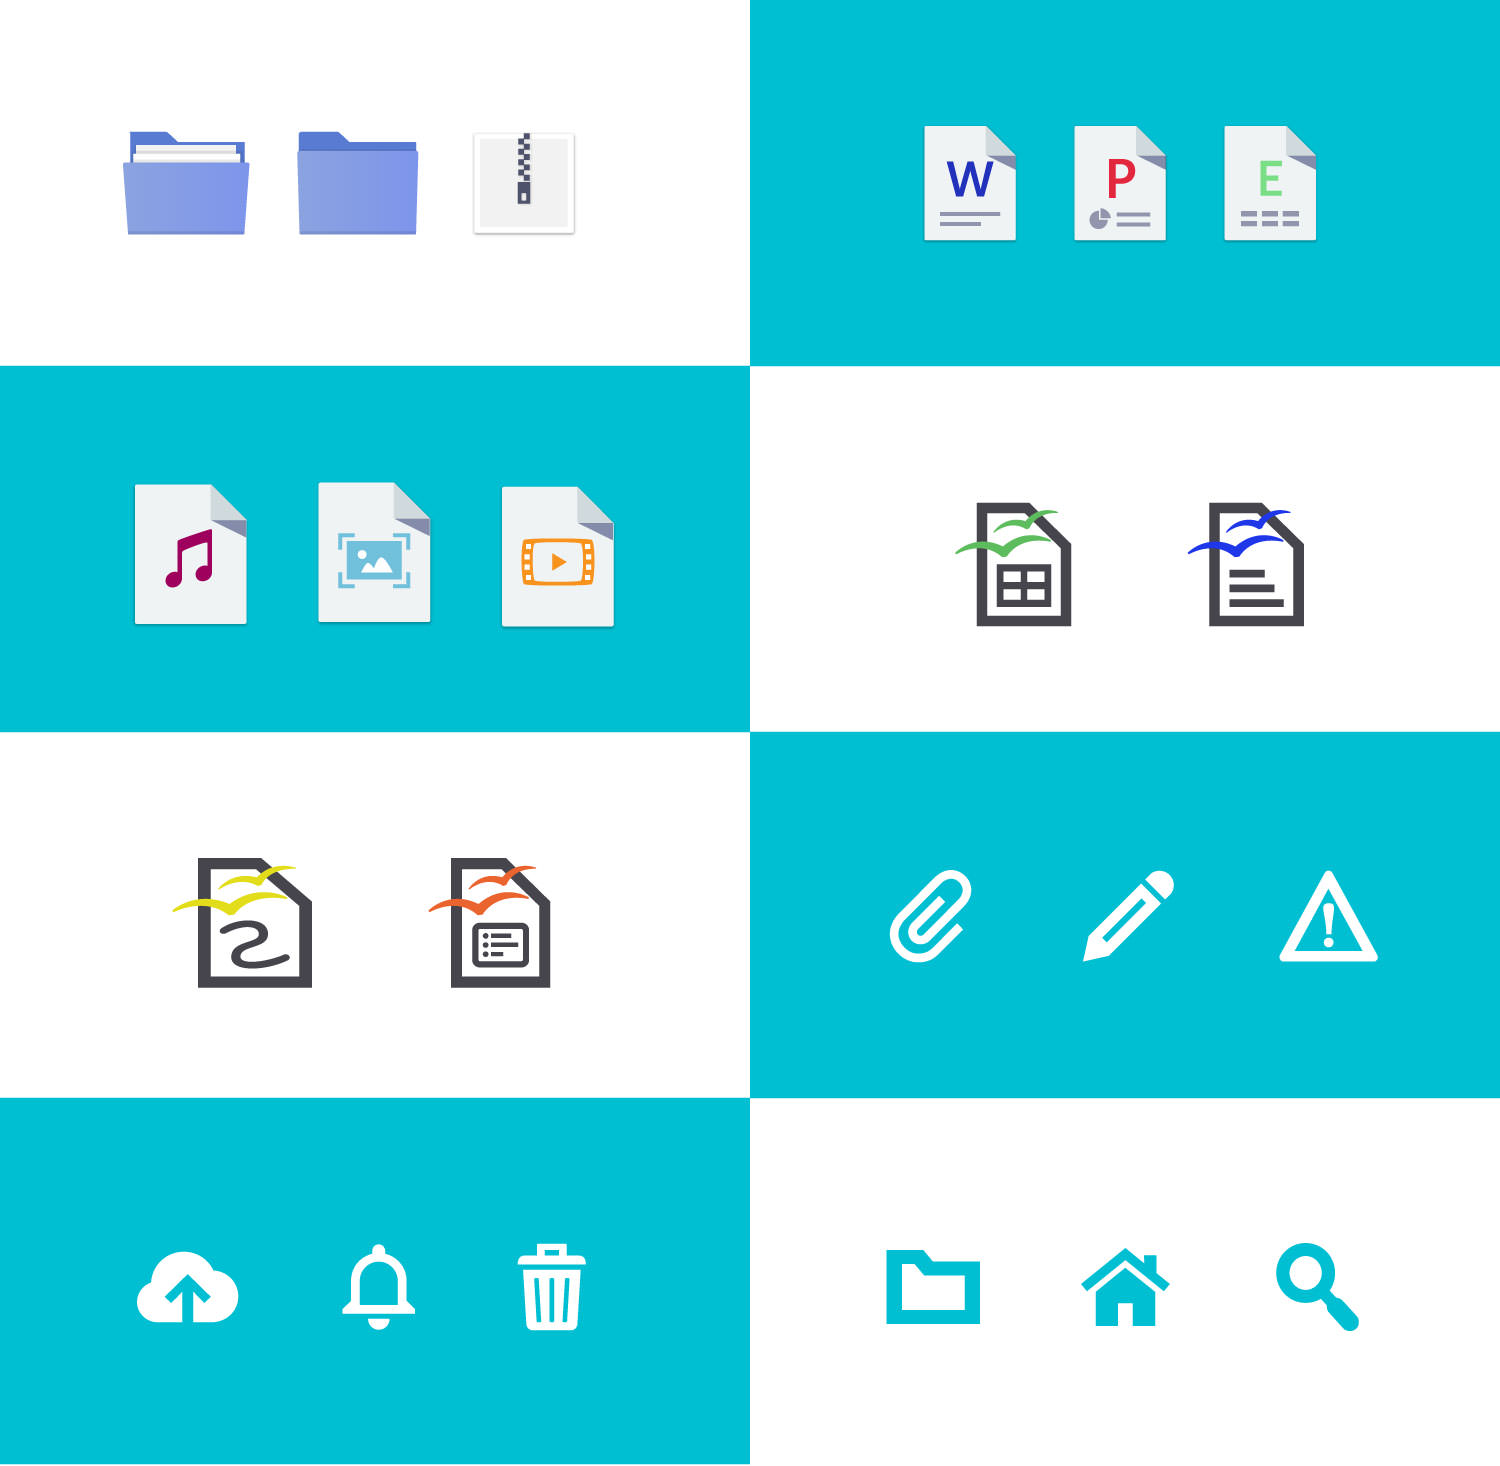 Some of the icons for open365